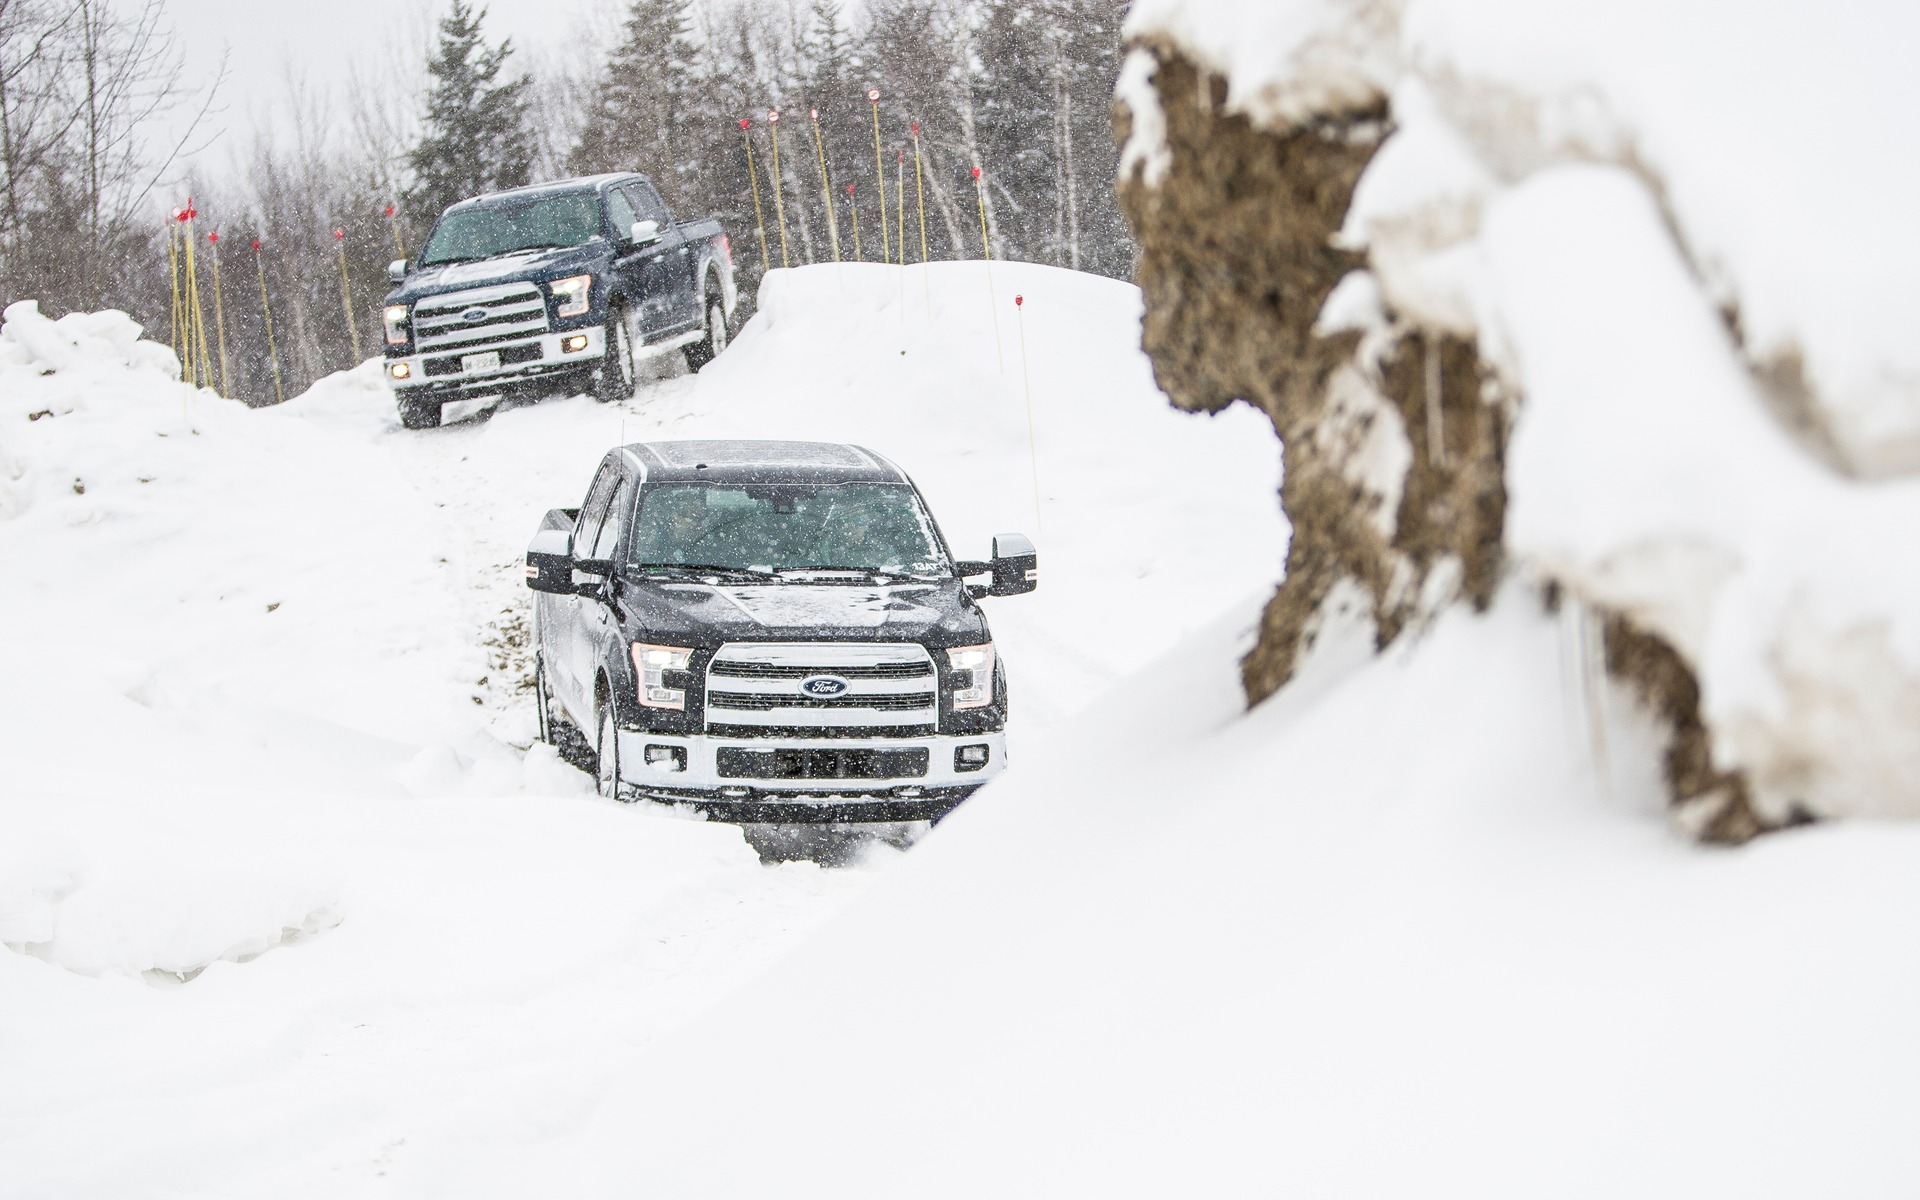 A few centimetres of snow aren’t going to stop a truck!